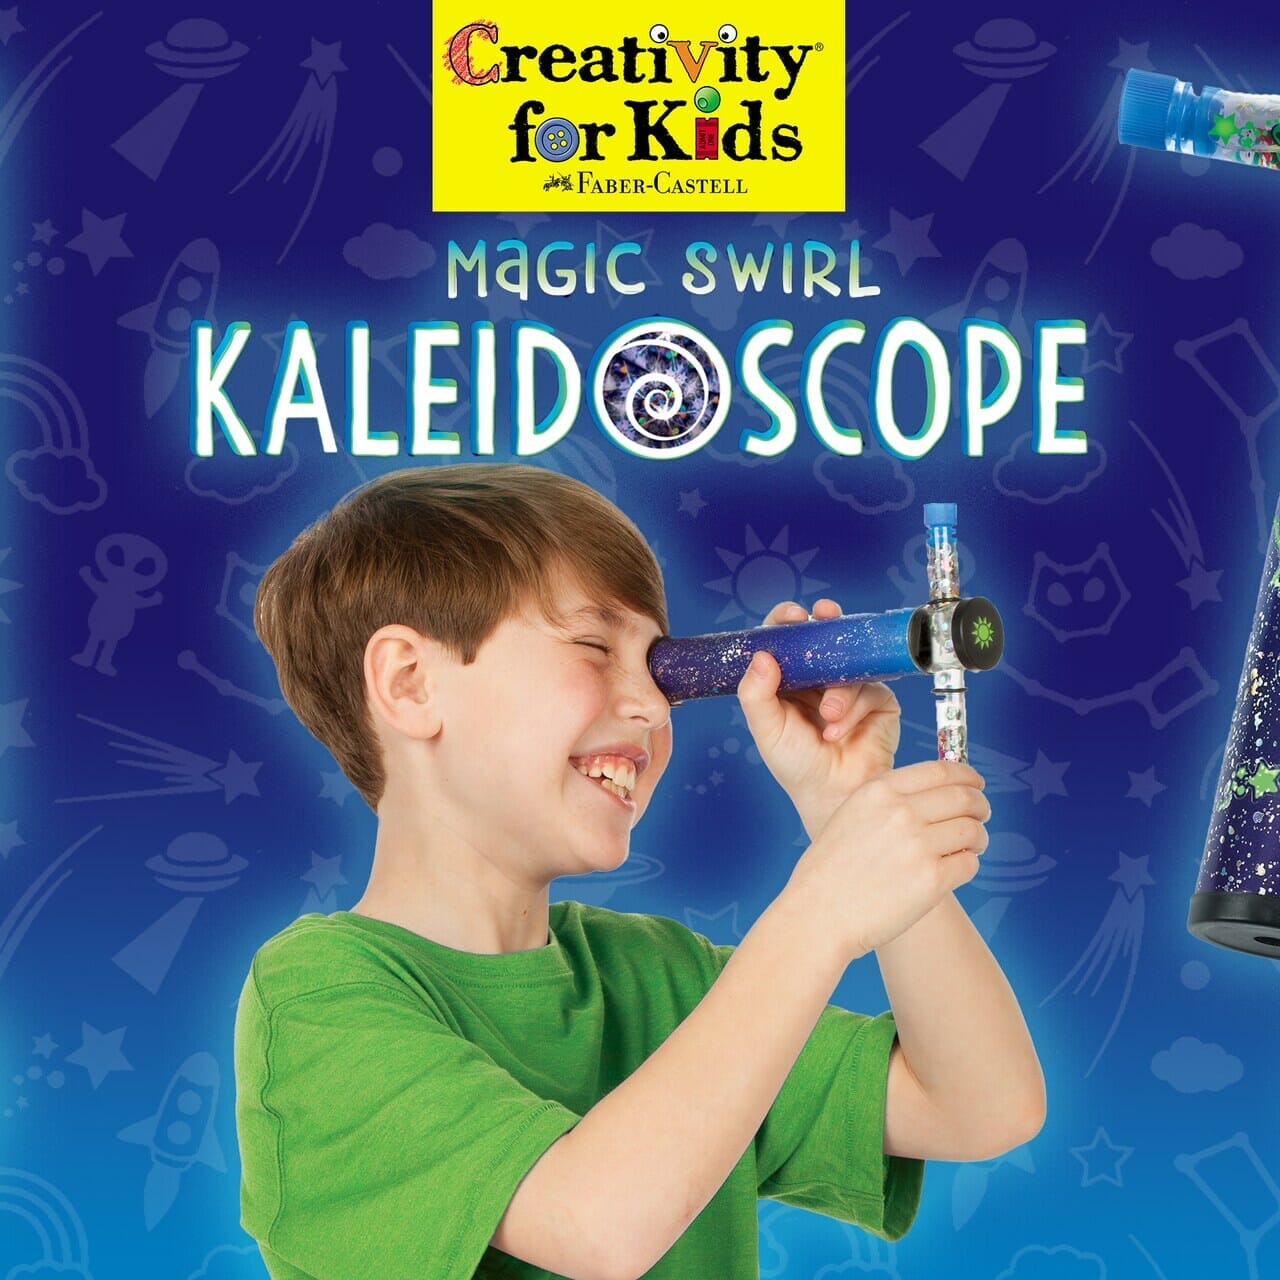 Michaels Kids Club: Create an Out of this World Kaleidoscope | Michaels Online